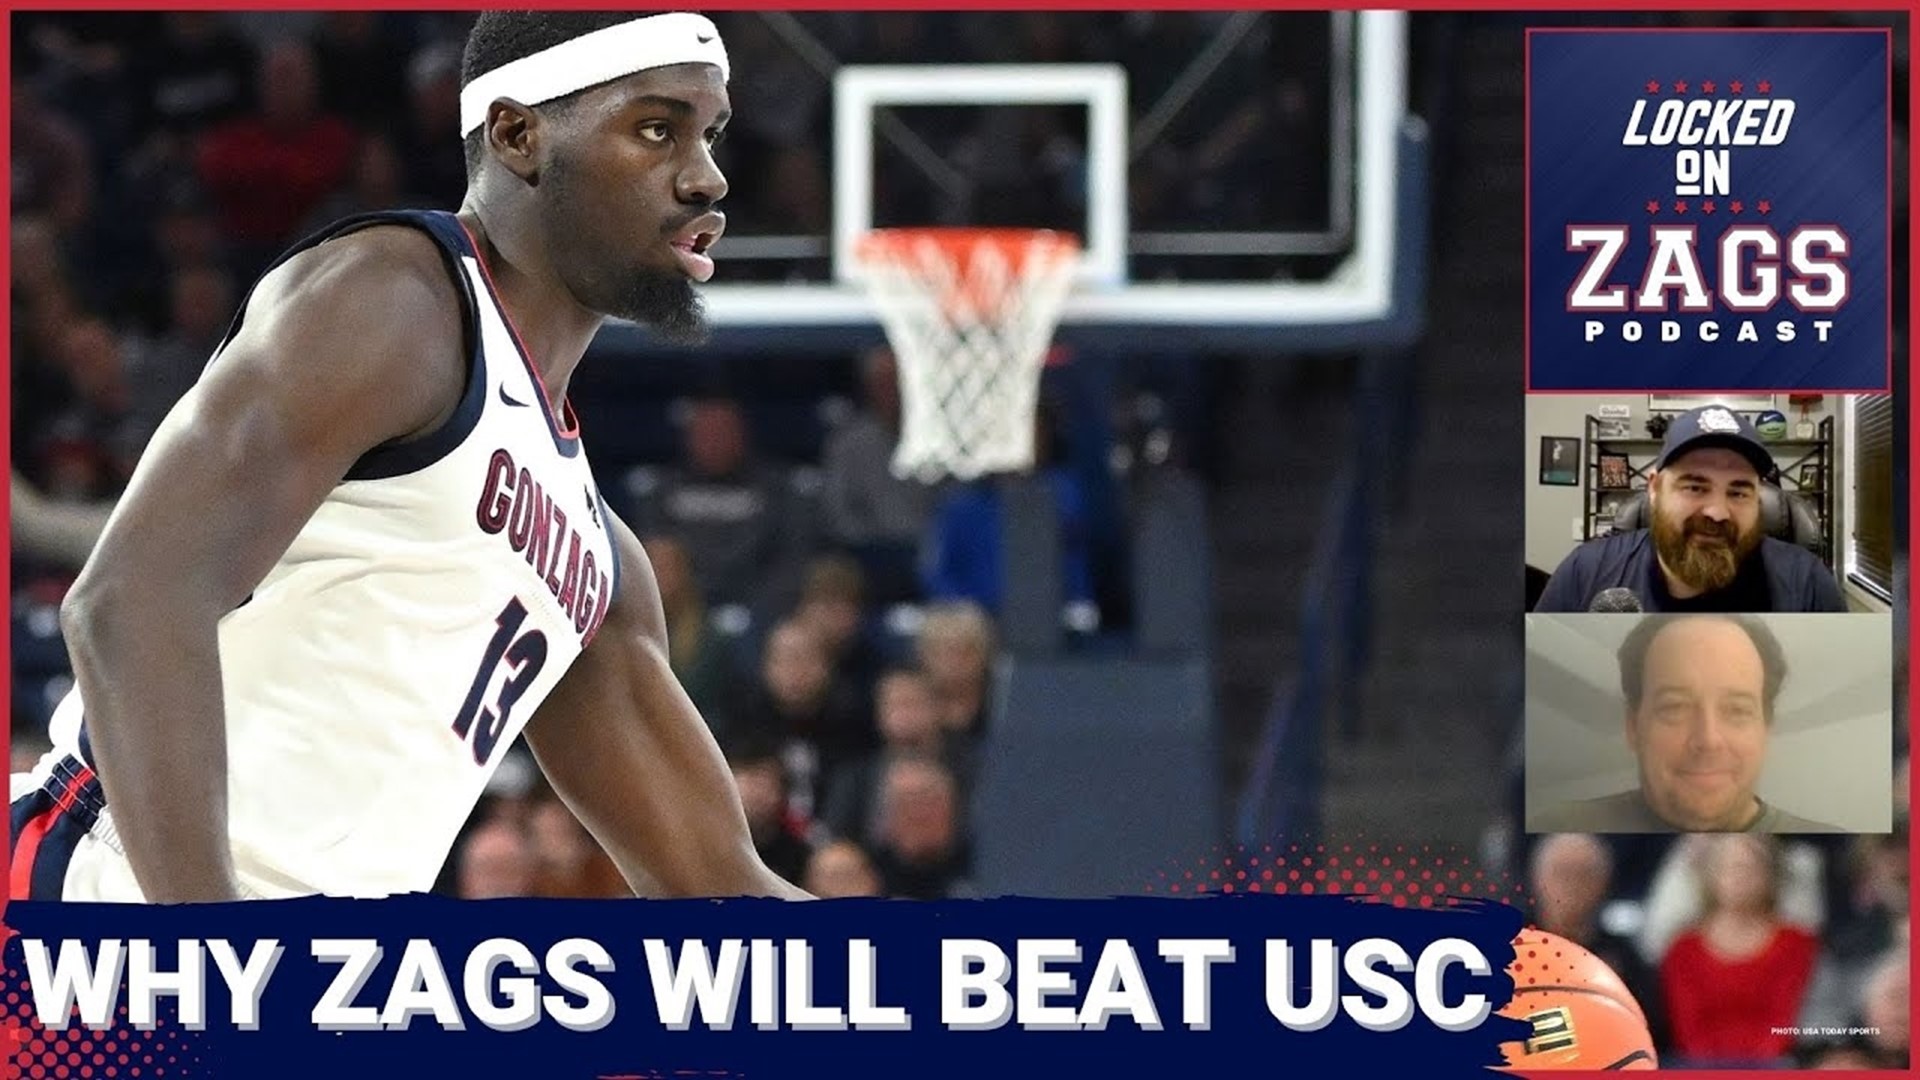 Mark Few and the Gonzaga Bulldogs will face the USC Trojans at the MGM Grand in Las Vegas on Saturday, December 2.